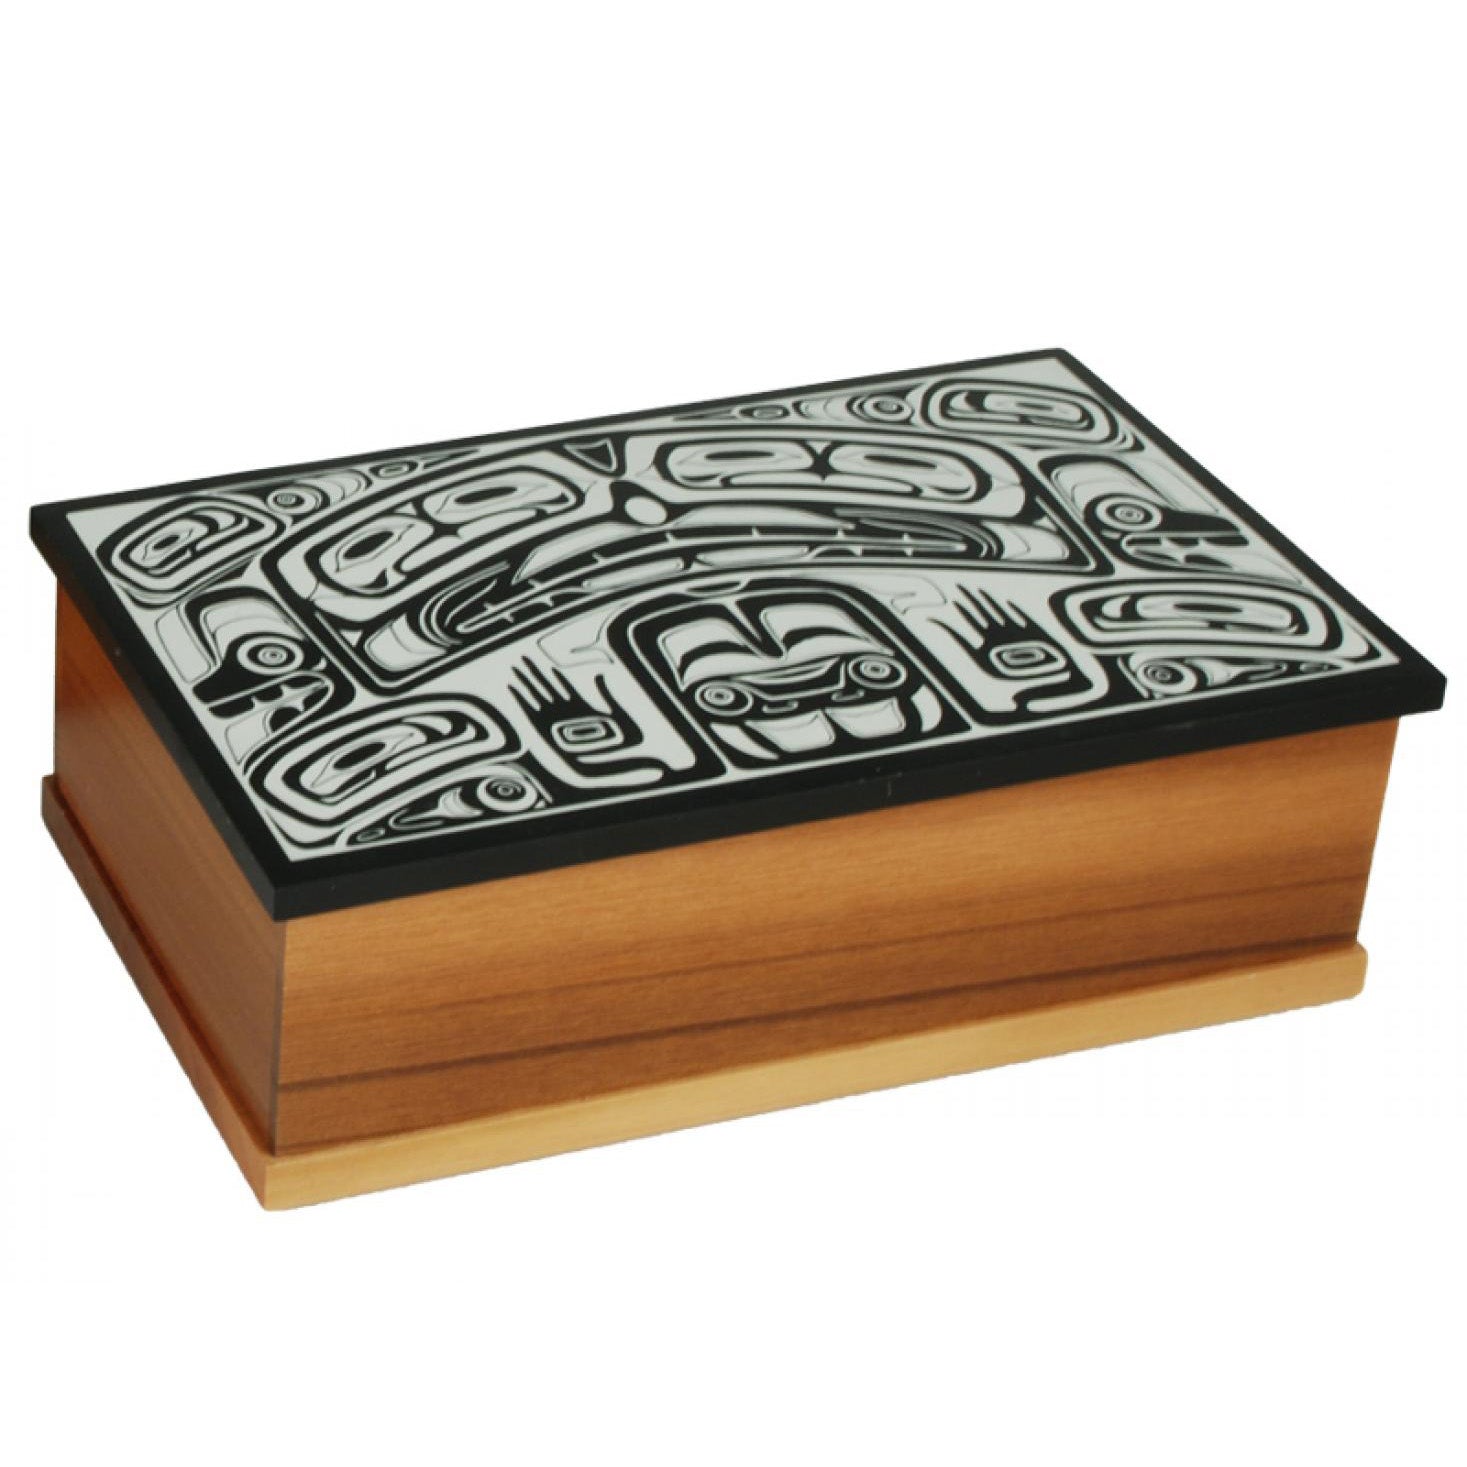 Desk Box - Ivory Color Inlay